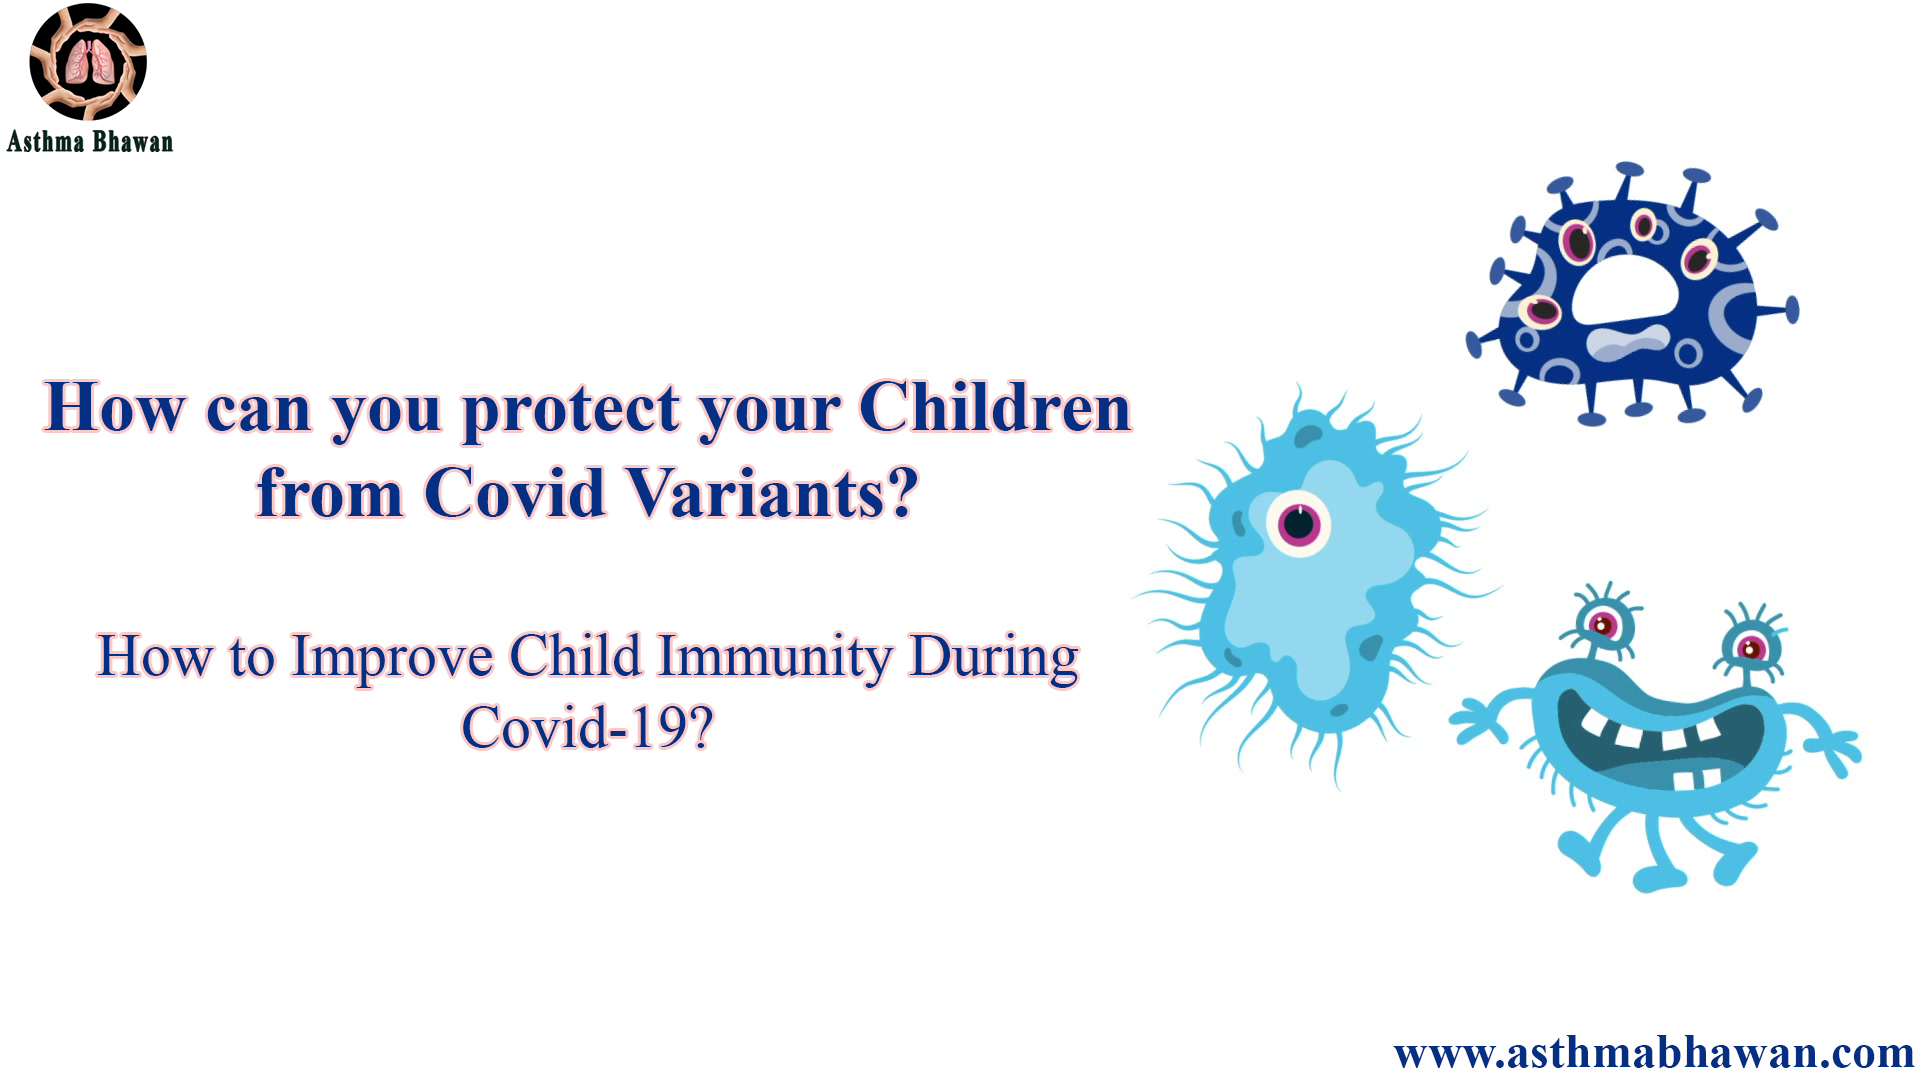 How Can You Protect Your Children from COVID-19 Variants?